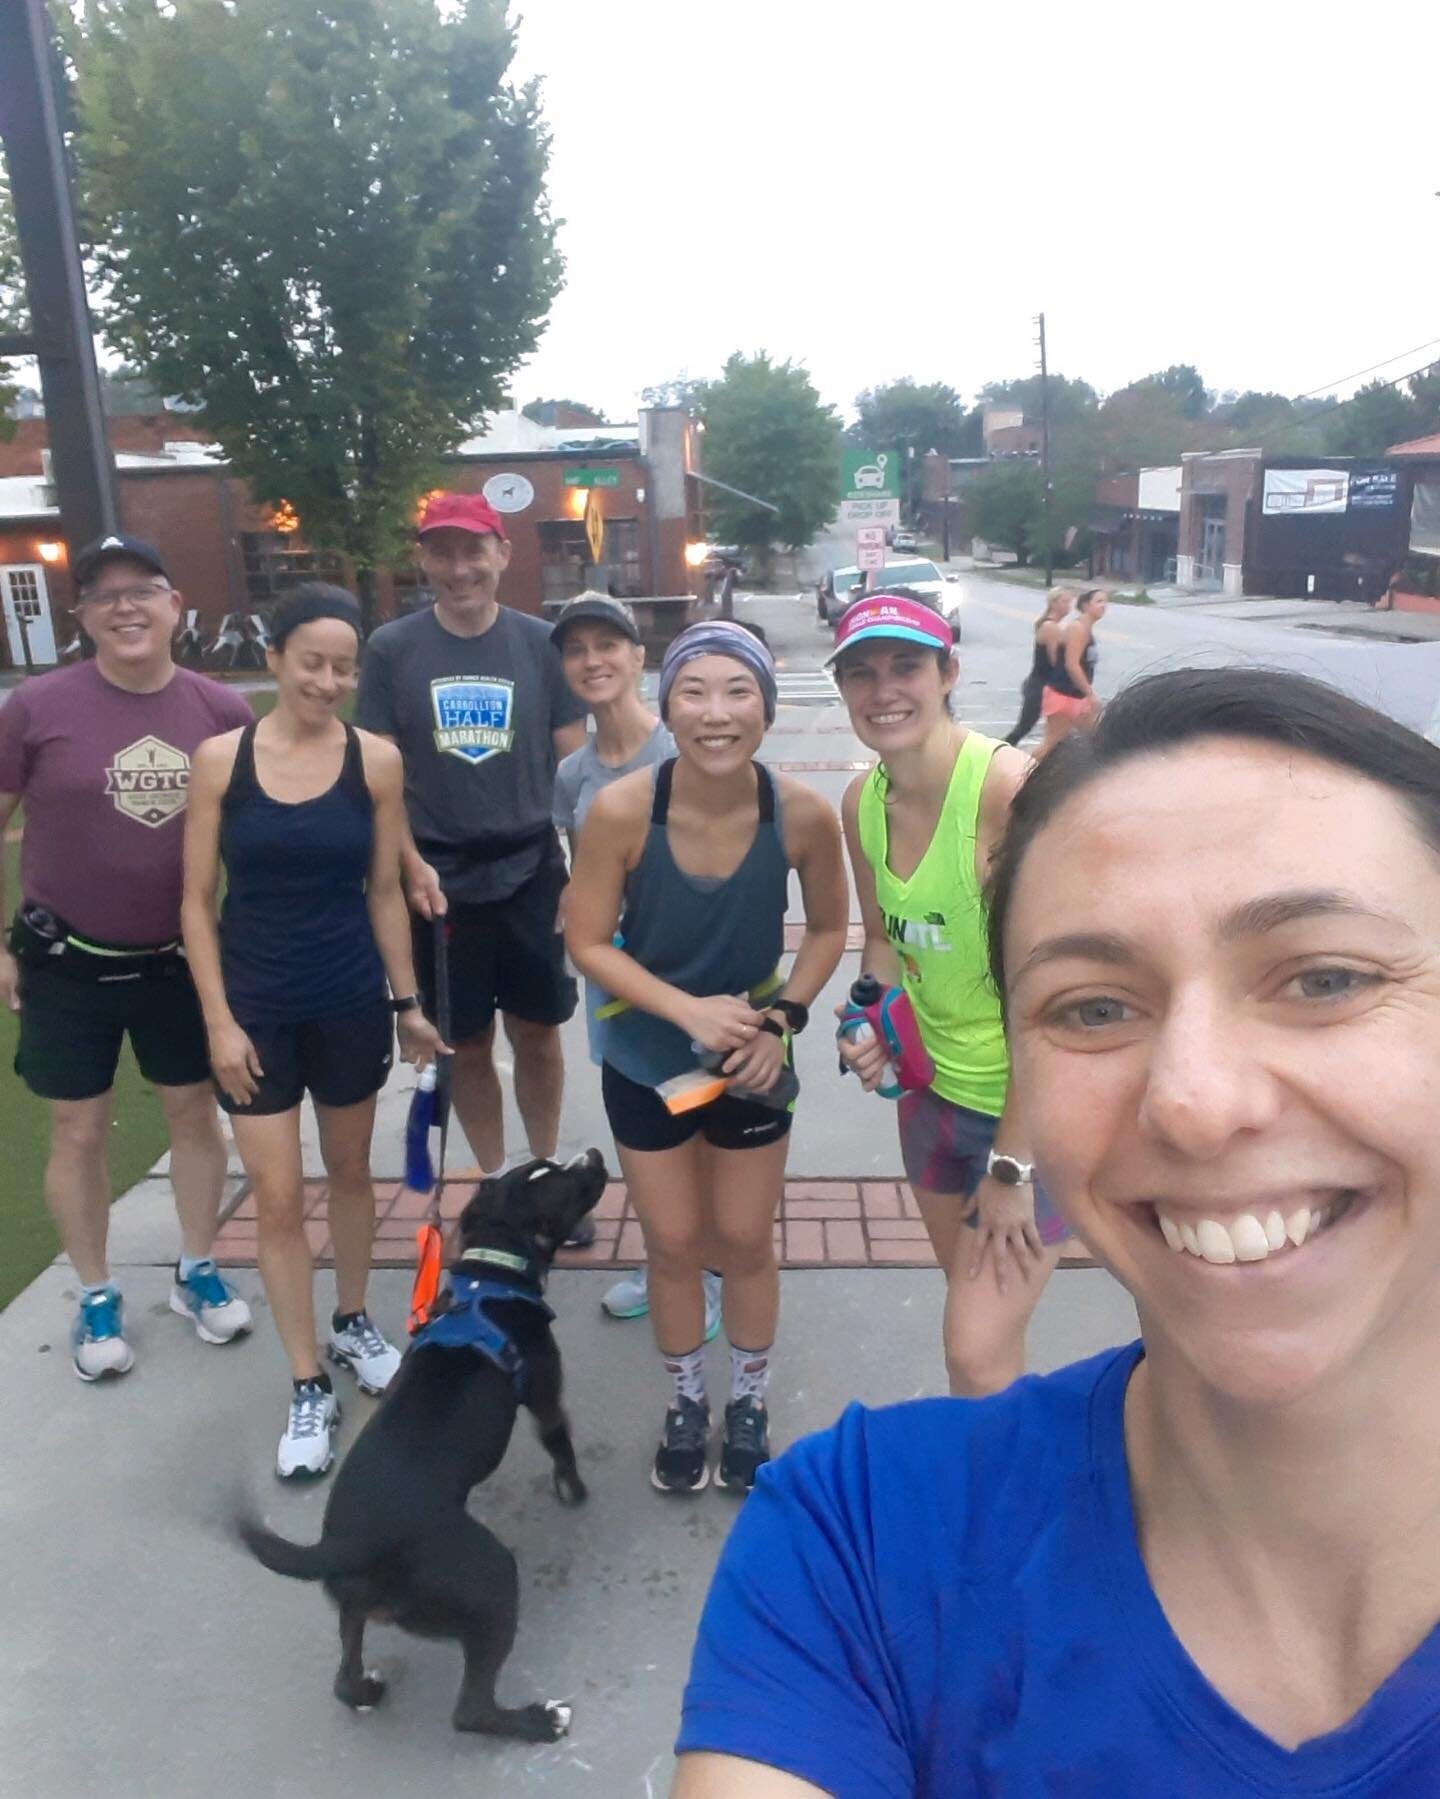 L👀K at our run crew this morning! 🌅 🏃&zwj;♀️ 🏃&zwj;♂️ 🐕 Nothing beats running with friends to get your Saturday morning going! 💥 We meet at the Amp at 7:30a every Saturday morning!
#westga #westgatrackclub #carrolltonga #carrolltonhalfmarathon